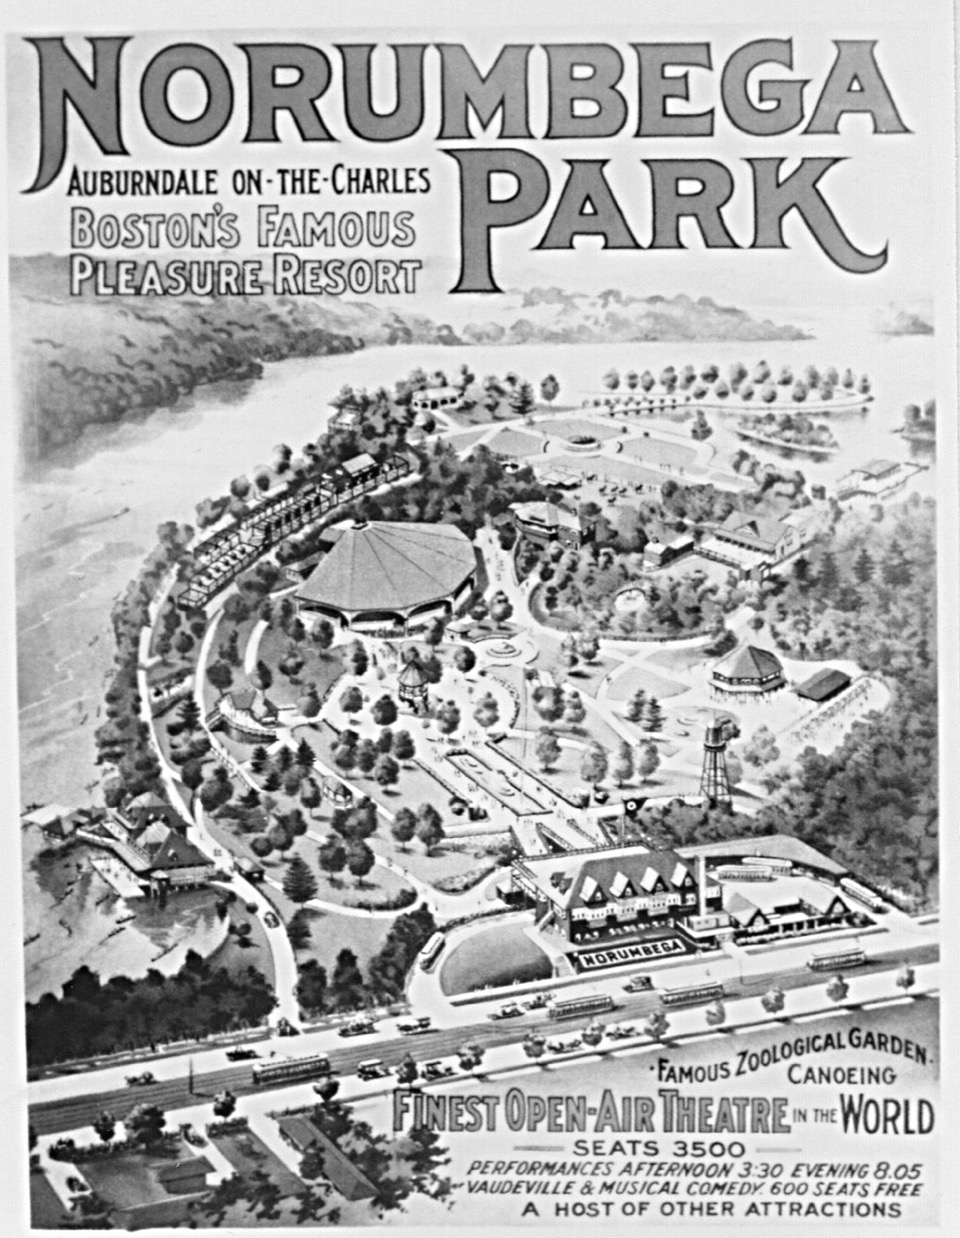 Poster advertising Norumbega Park with illustrated bird's-eye view of the park and the Charles River.